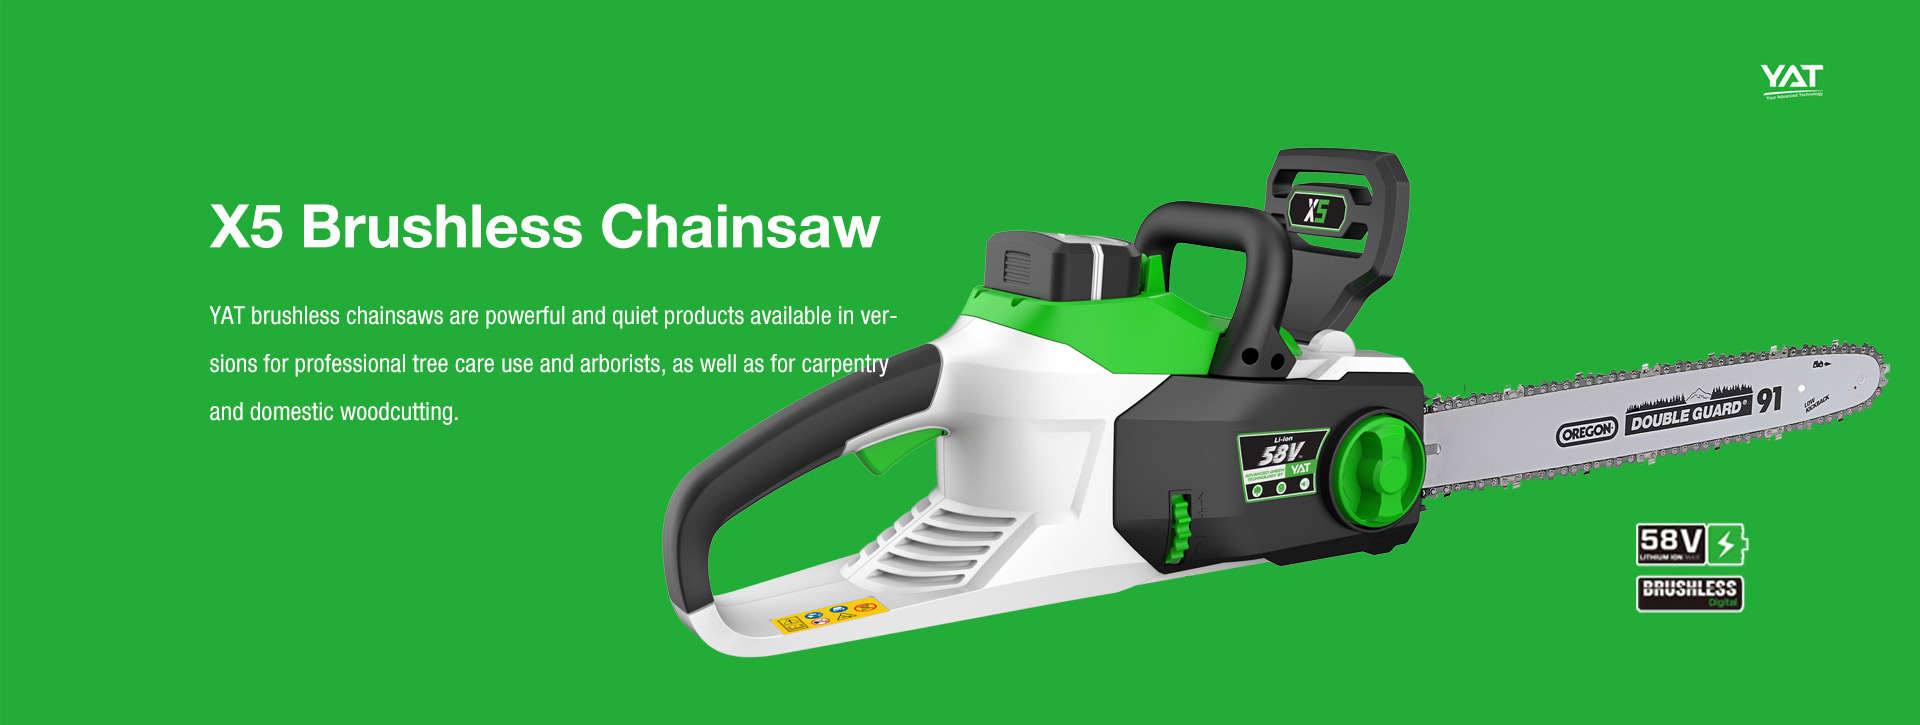 X5 BRUSHLESS CHAINSAW